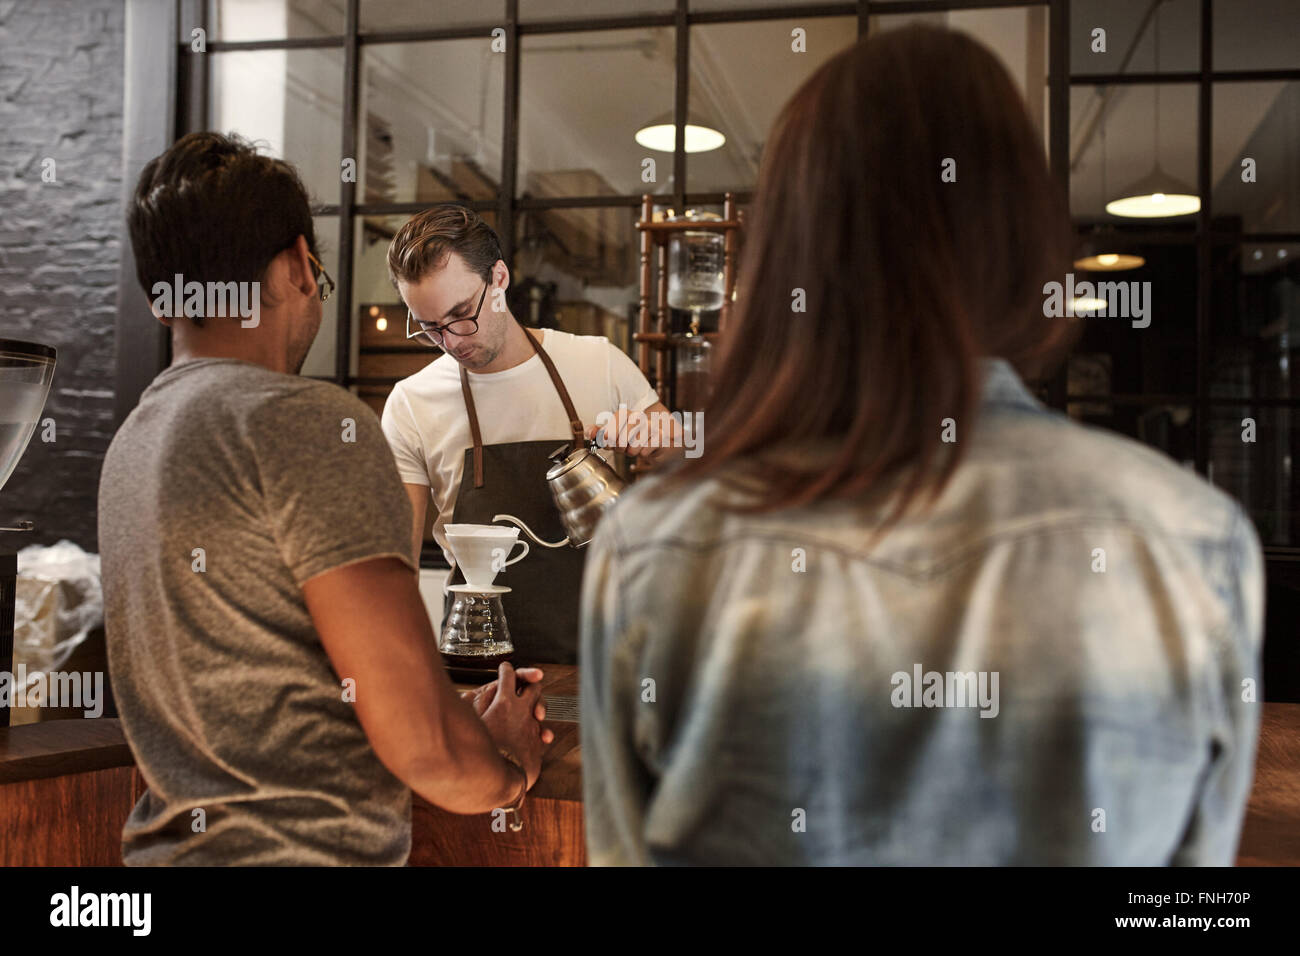 Couple at a cafe counter with barista pouring coffee Stock Photo